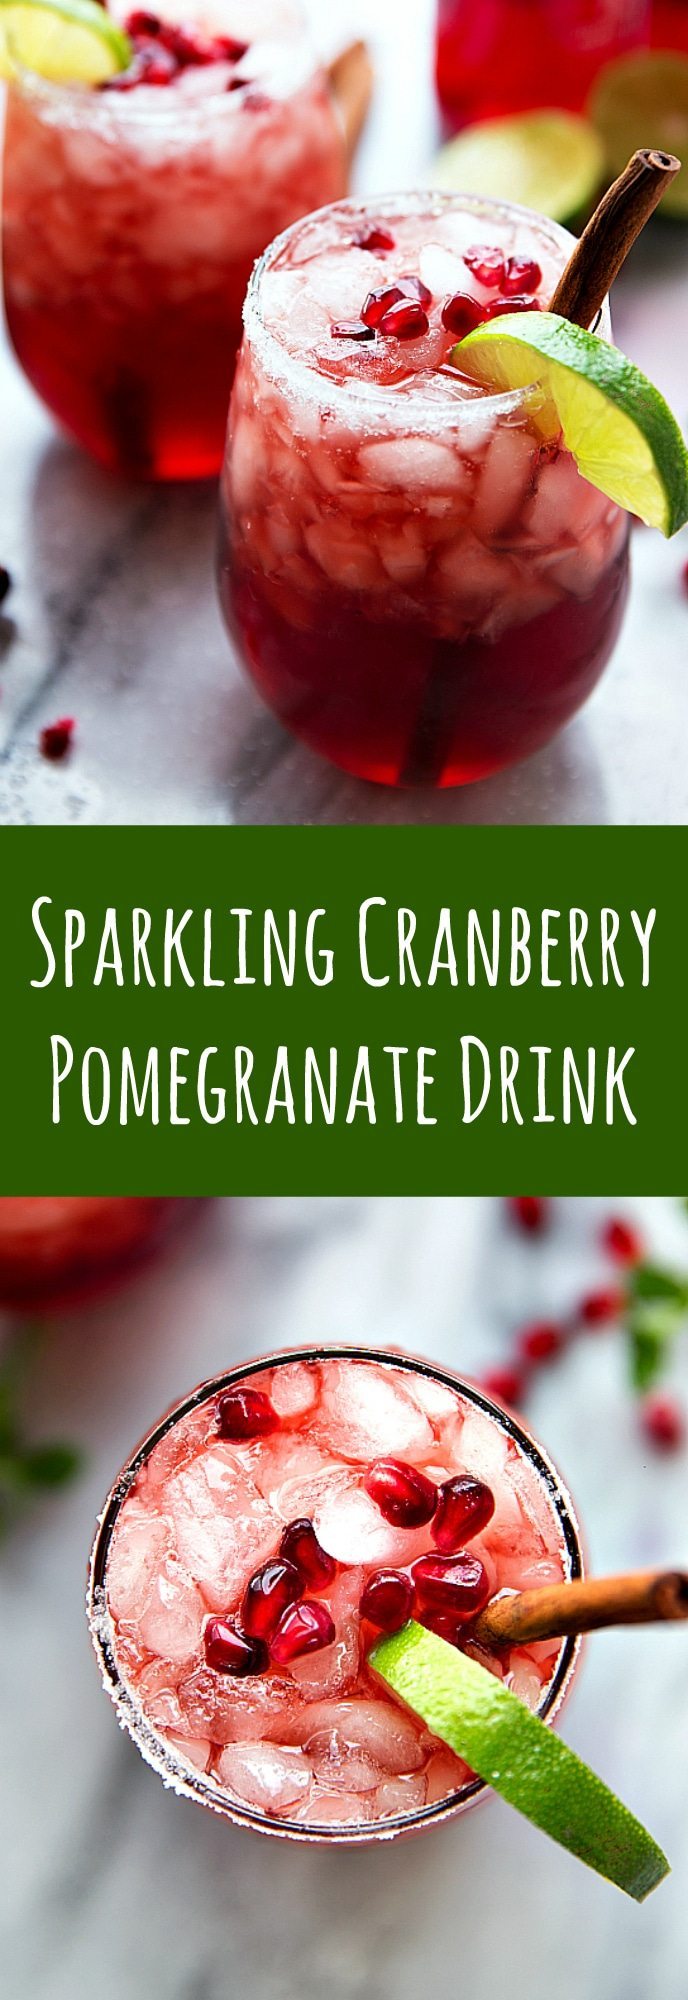 A non-alcoholic sparkling cranberry lime & pomegranate beverage -- perfect for holiday entertaining!